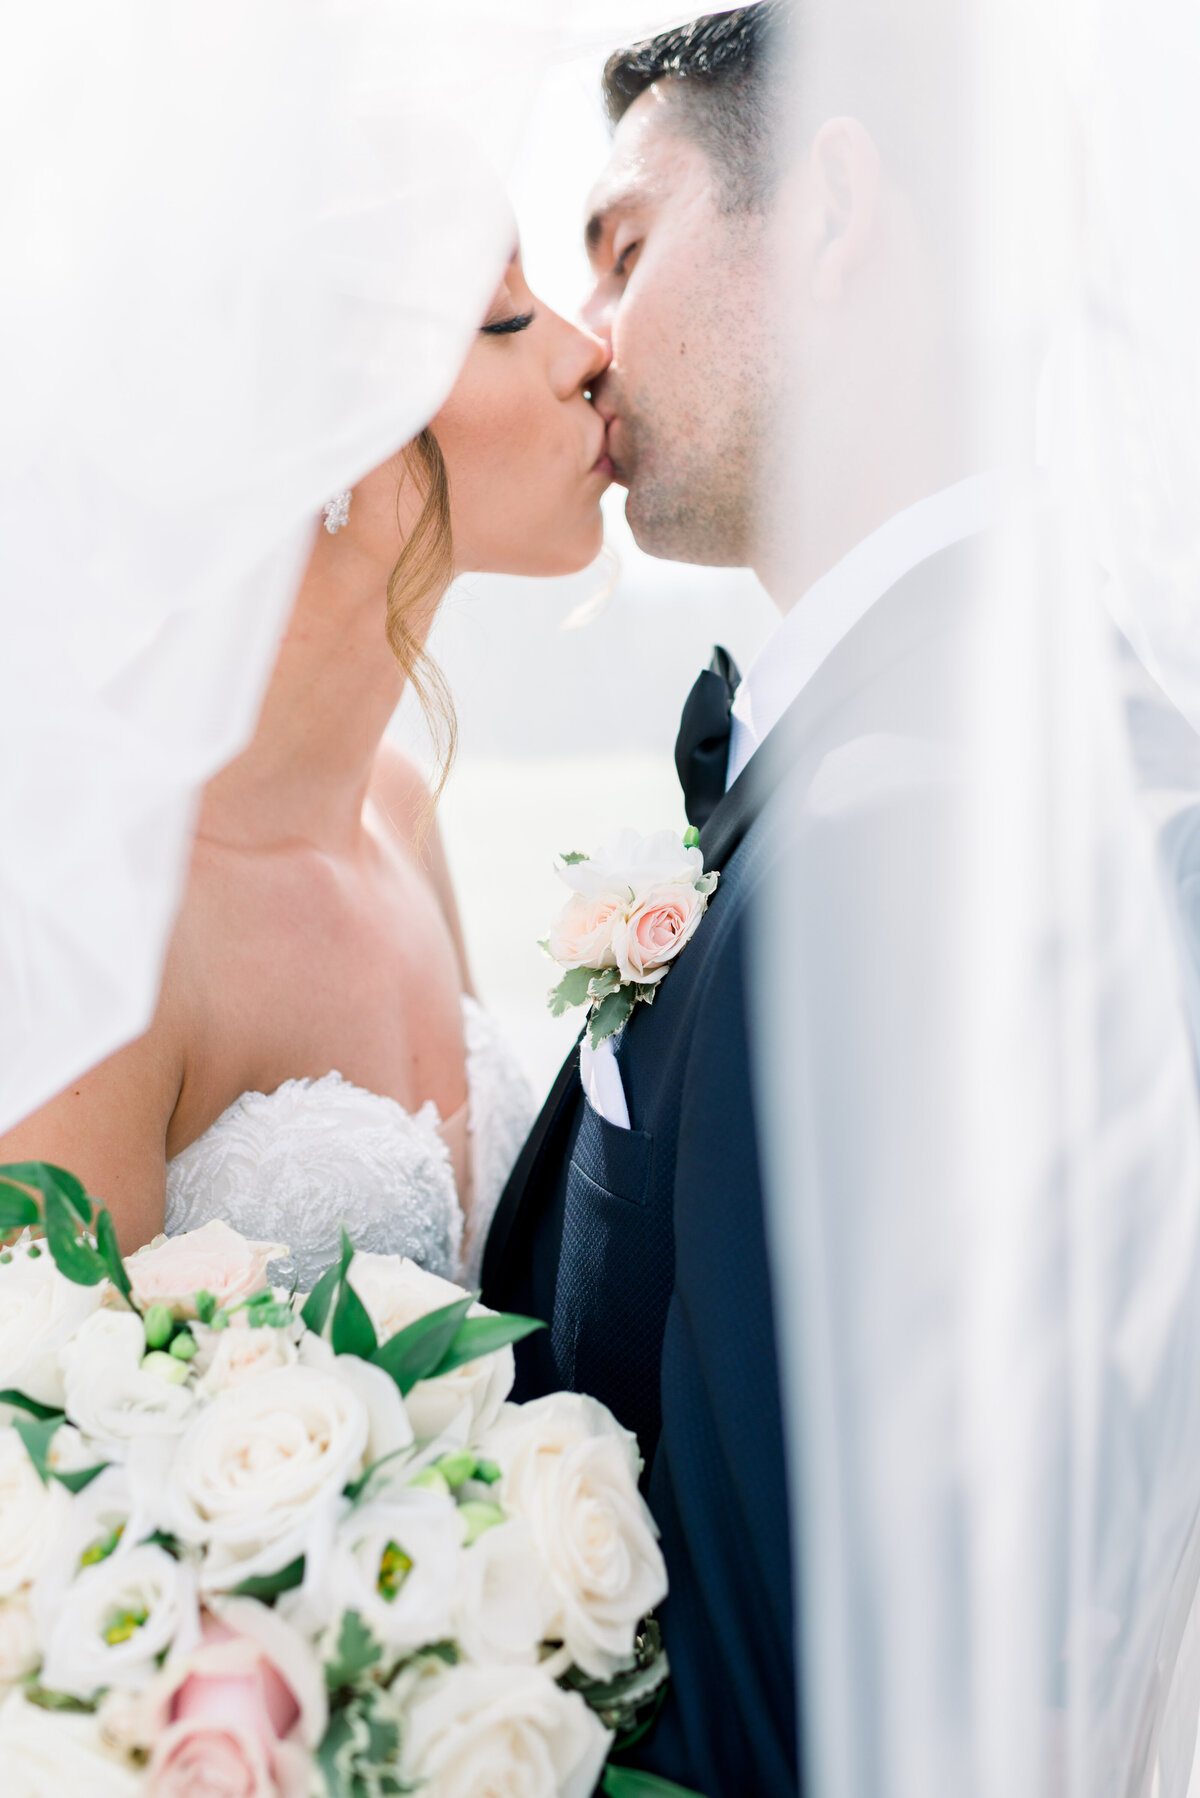 Bride and Groom kissing photo at Glenemere Mansion in New York.